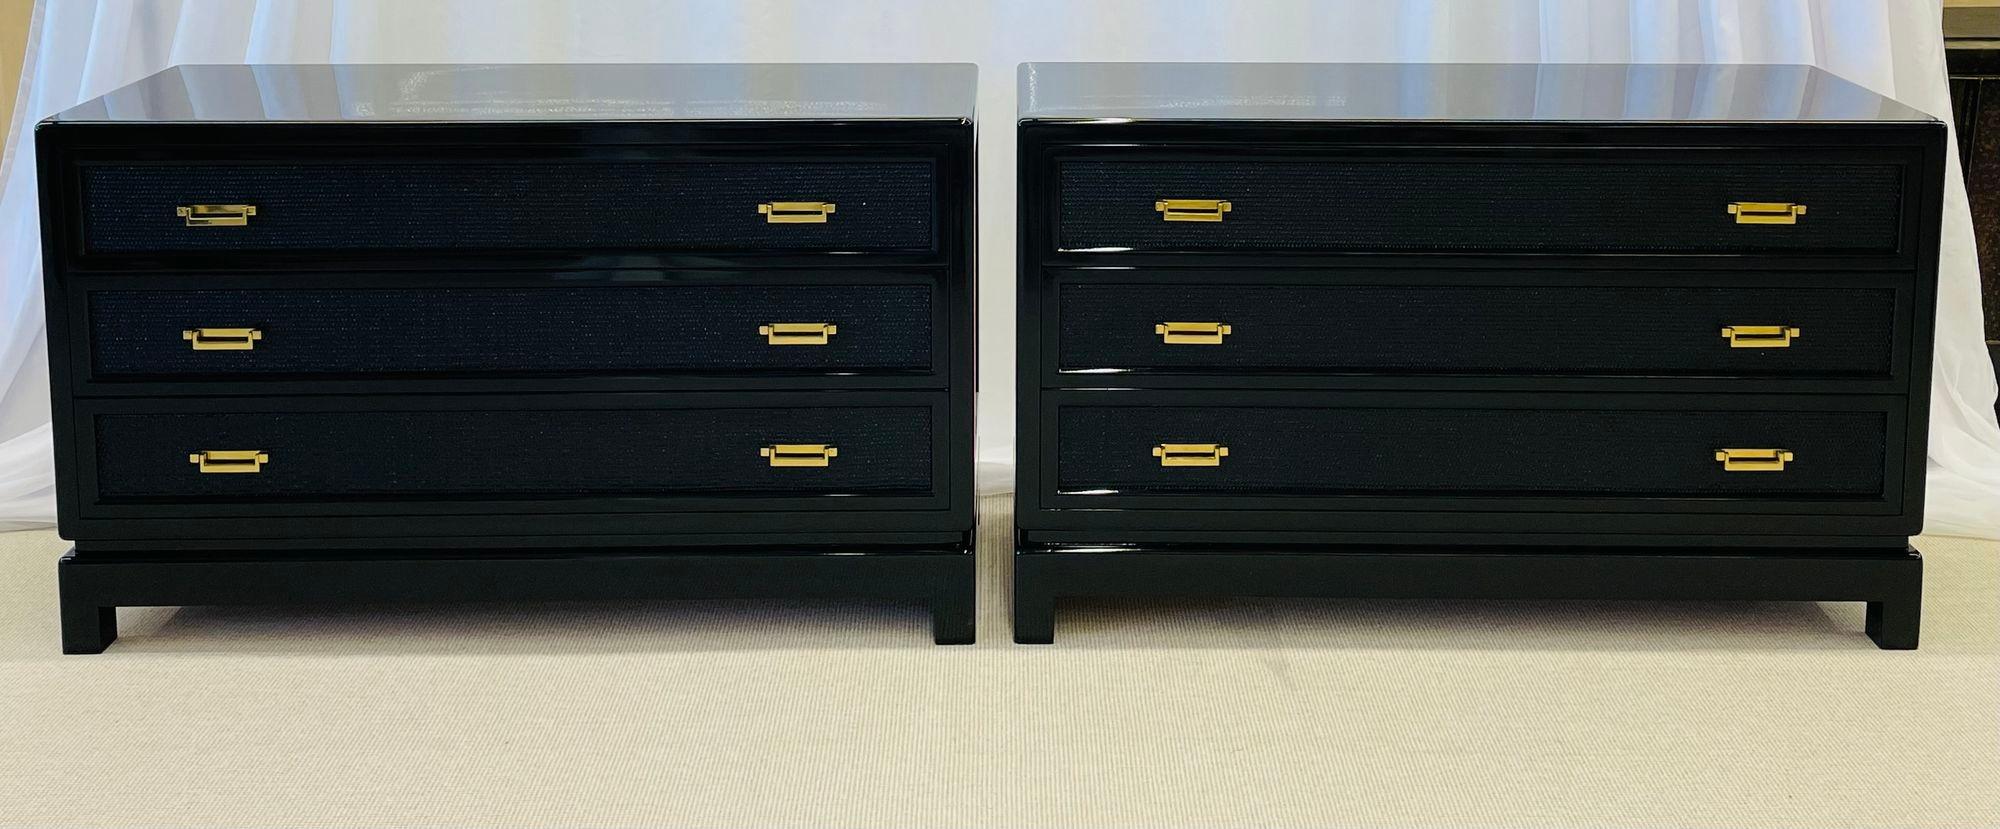 Pair of Mid-Century Modern cabinets, chests, nightstands, karl springer Style
Pair of Nightstands or Chests in the Manner of Karl Springer, having a black lacquer and rattan finish. The base giving a floating chest appearance having three drawers